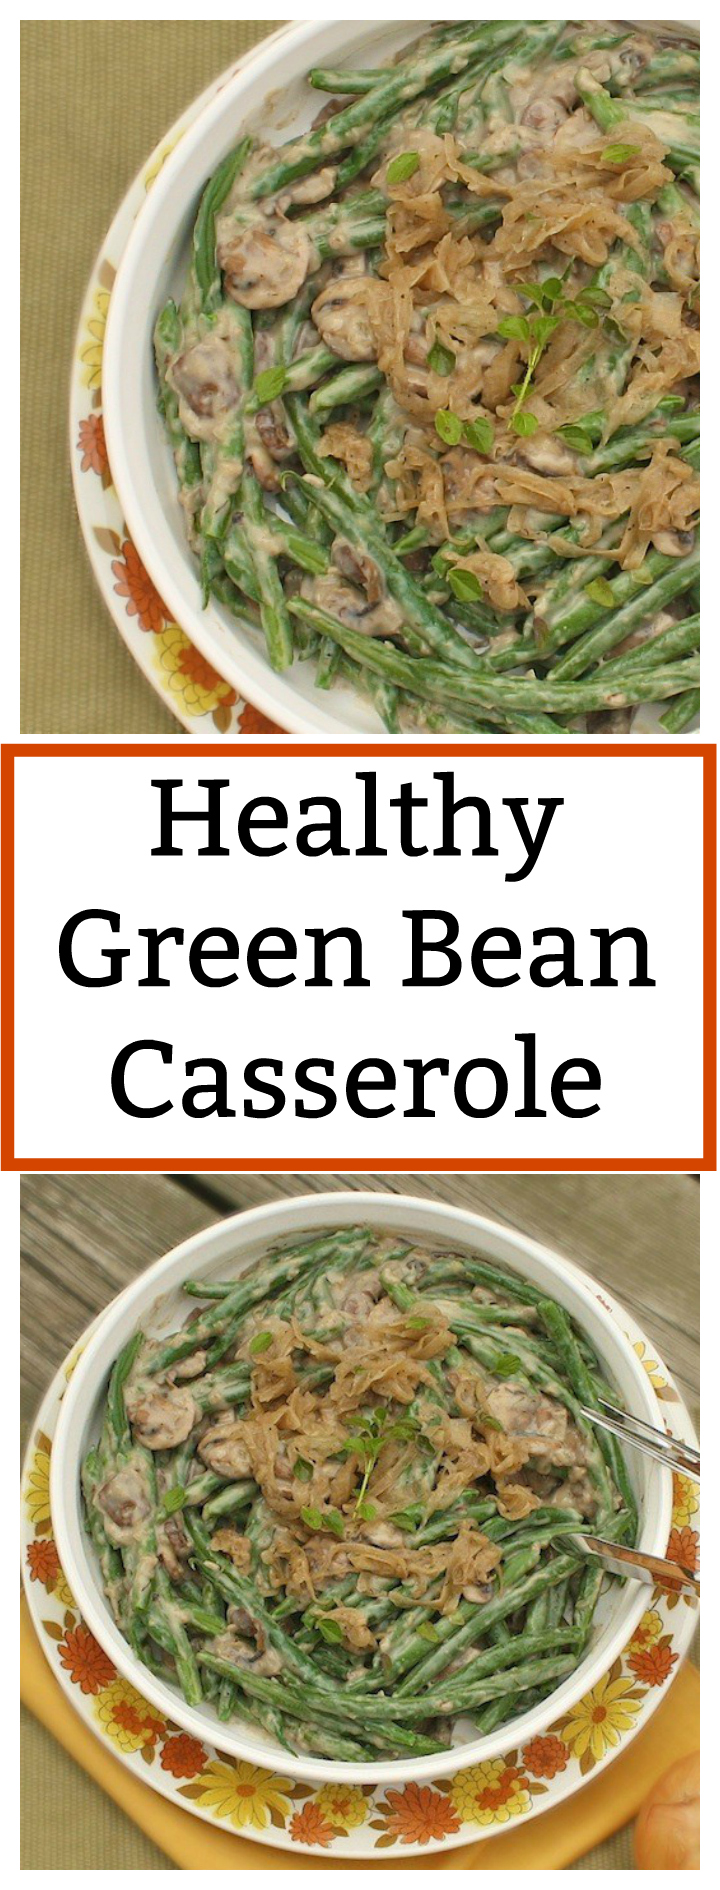 No canned cream soup. But just as easy. A new family favorite: HEALTHY GREEN BEAN CASSEROLE | @TspCurry - More healthy recipes at Teaspoonofspice.com